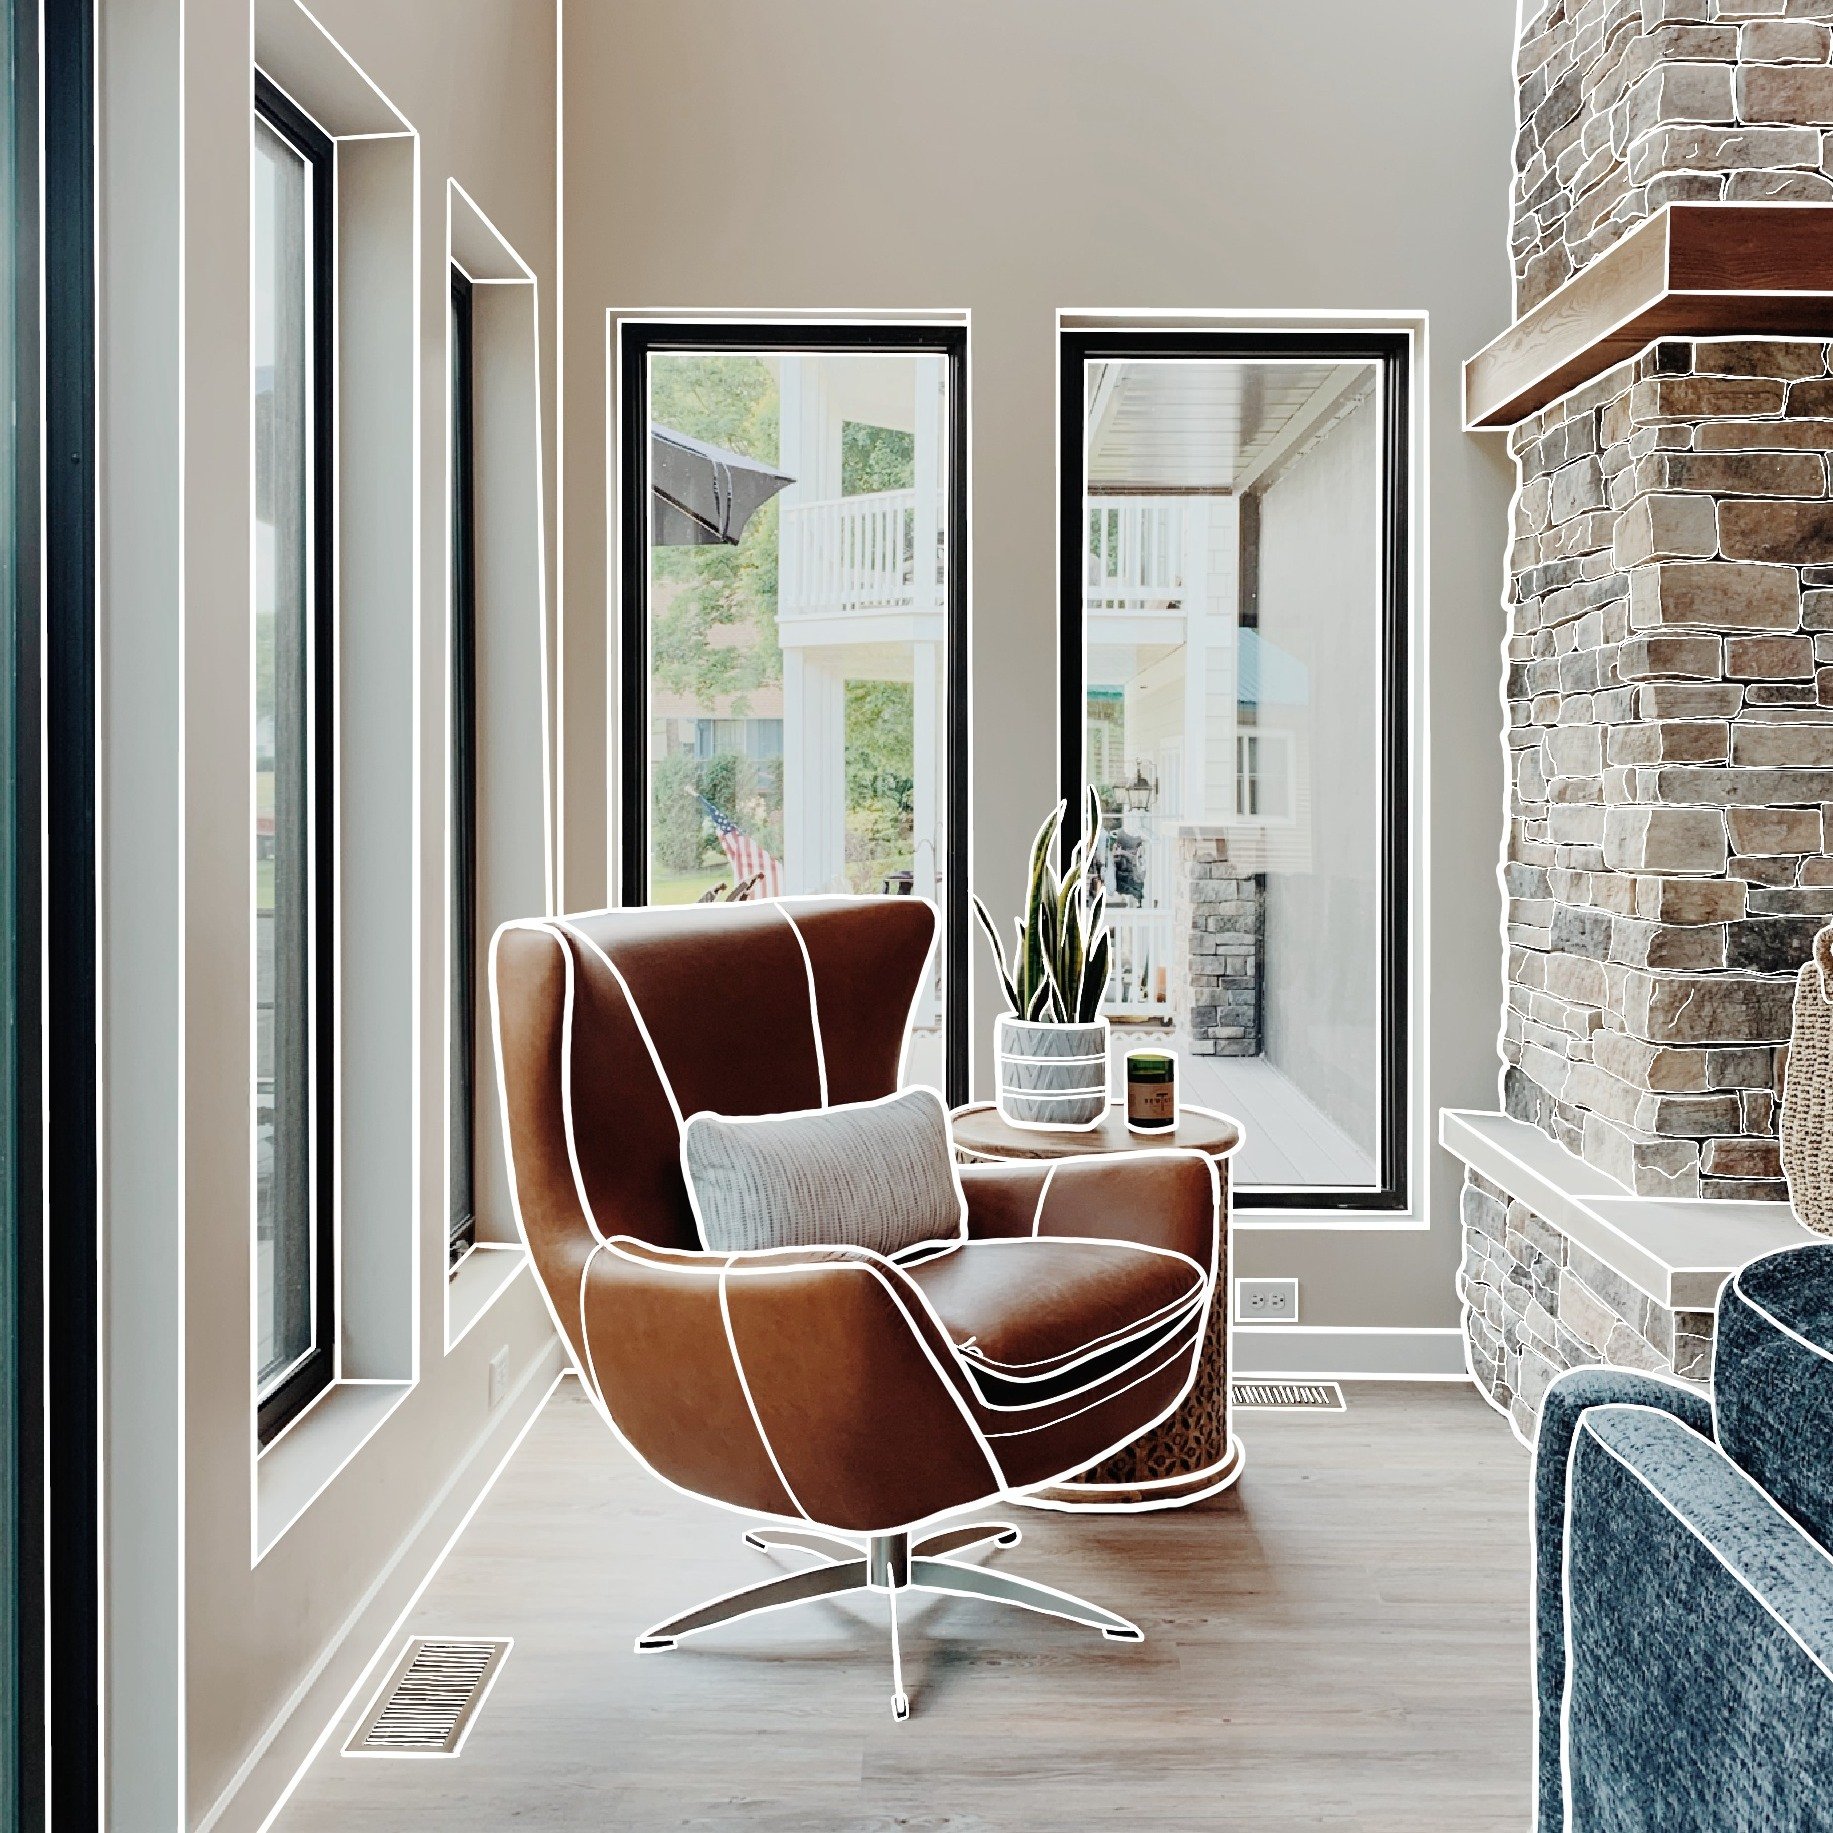 this chair is a favorite at DesignFive 🫶 the clean lines, combination of materials, and serene setting make this one of our best furniture arrangements. 
.
.
.
#designfive #pittsburgh #pittsburghinteriordesigner #pittsburghinteriors #interiordesign 